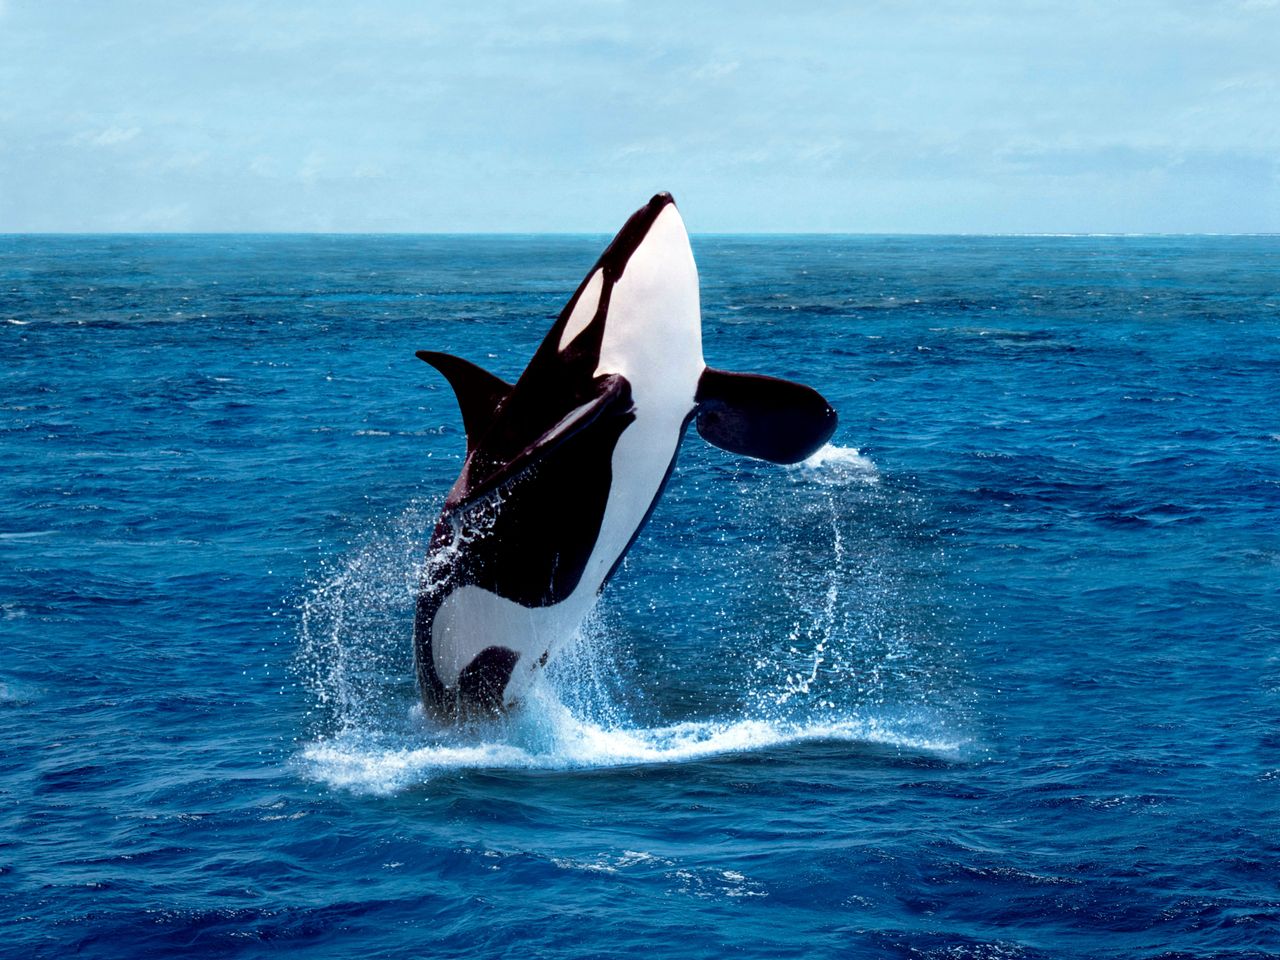 The killer whale is currently swimming in the bay off the coast of British Columbia.